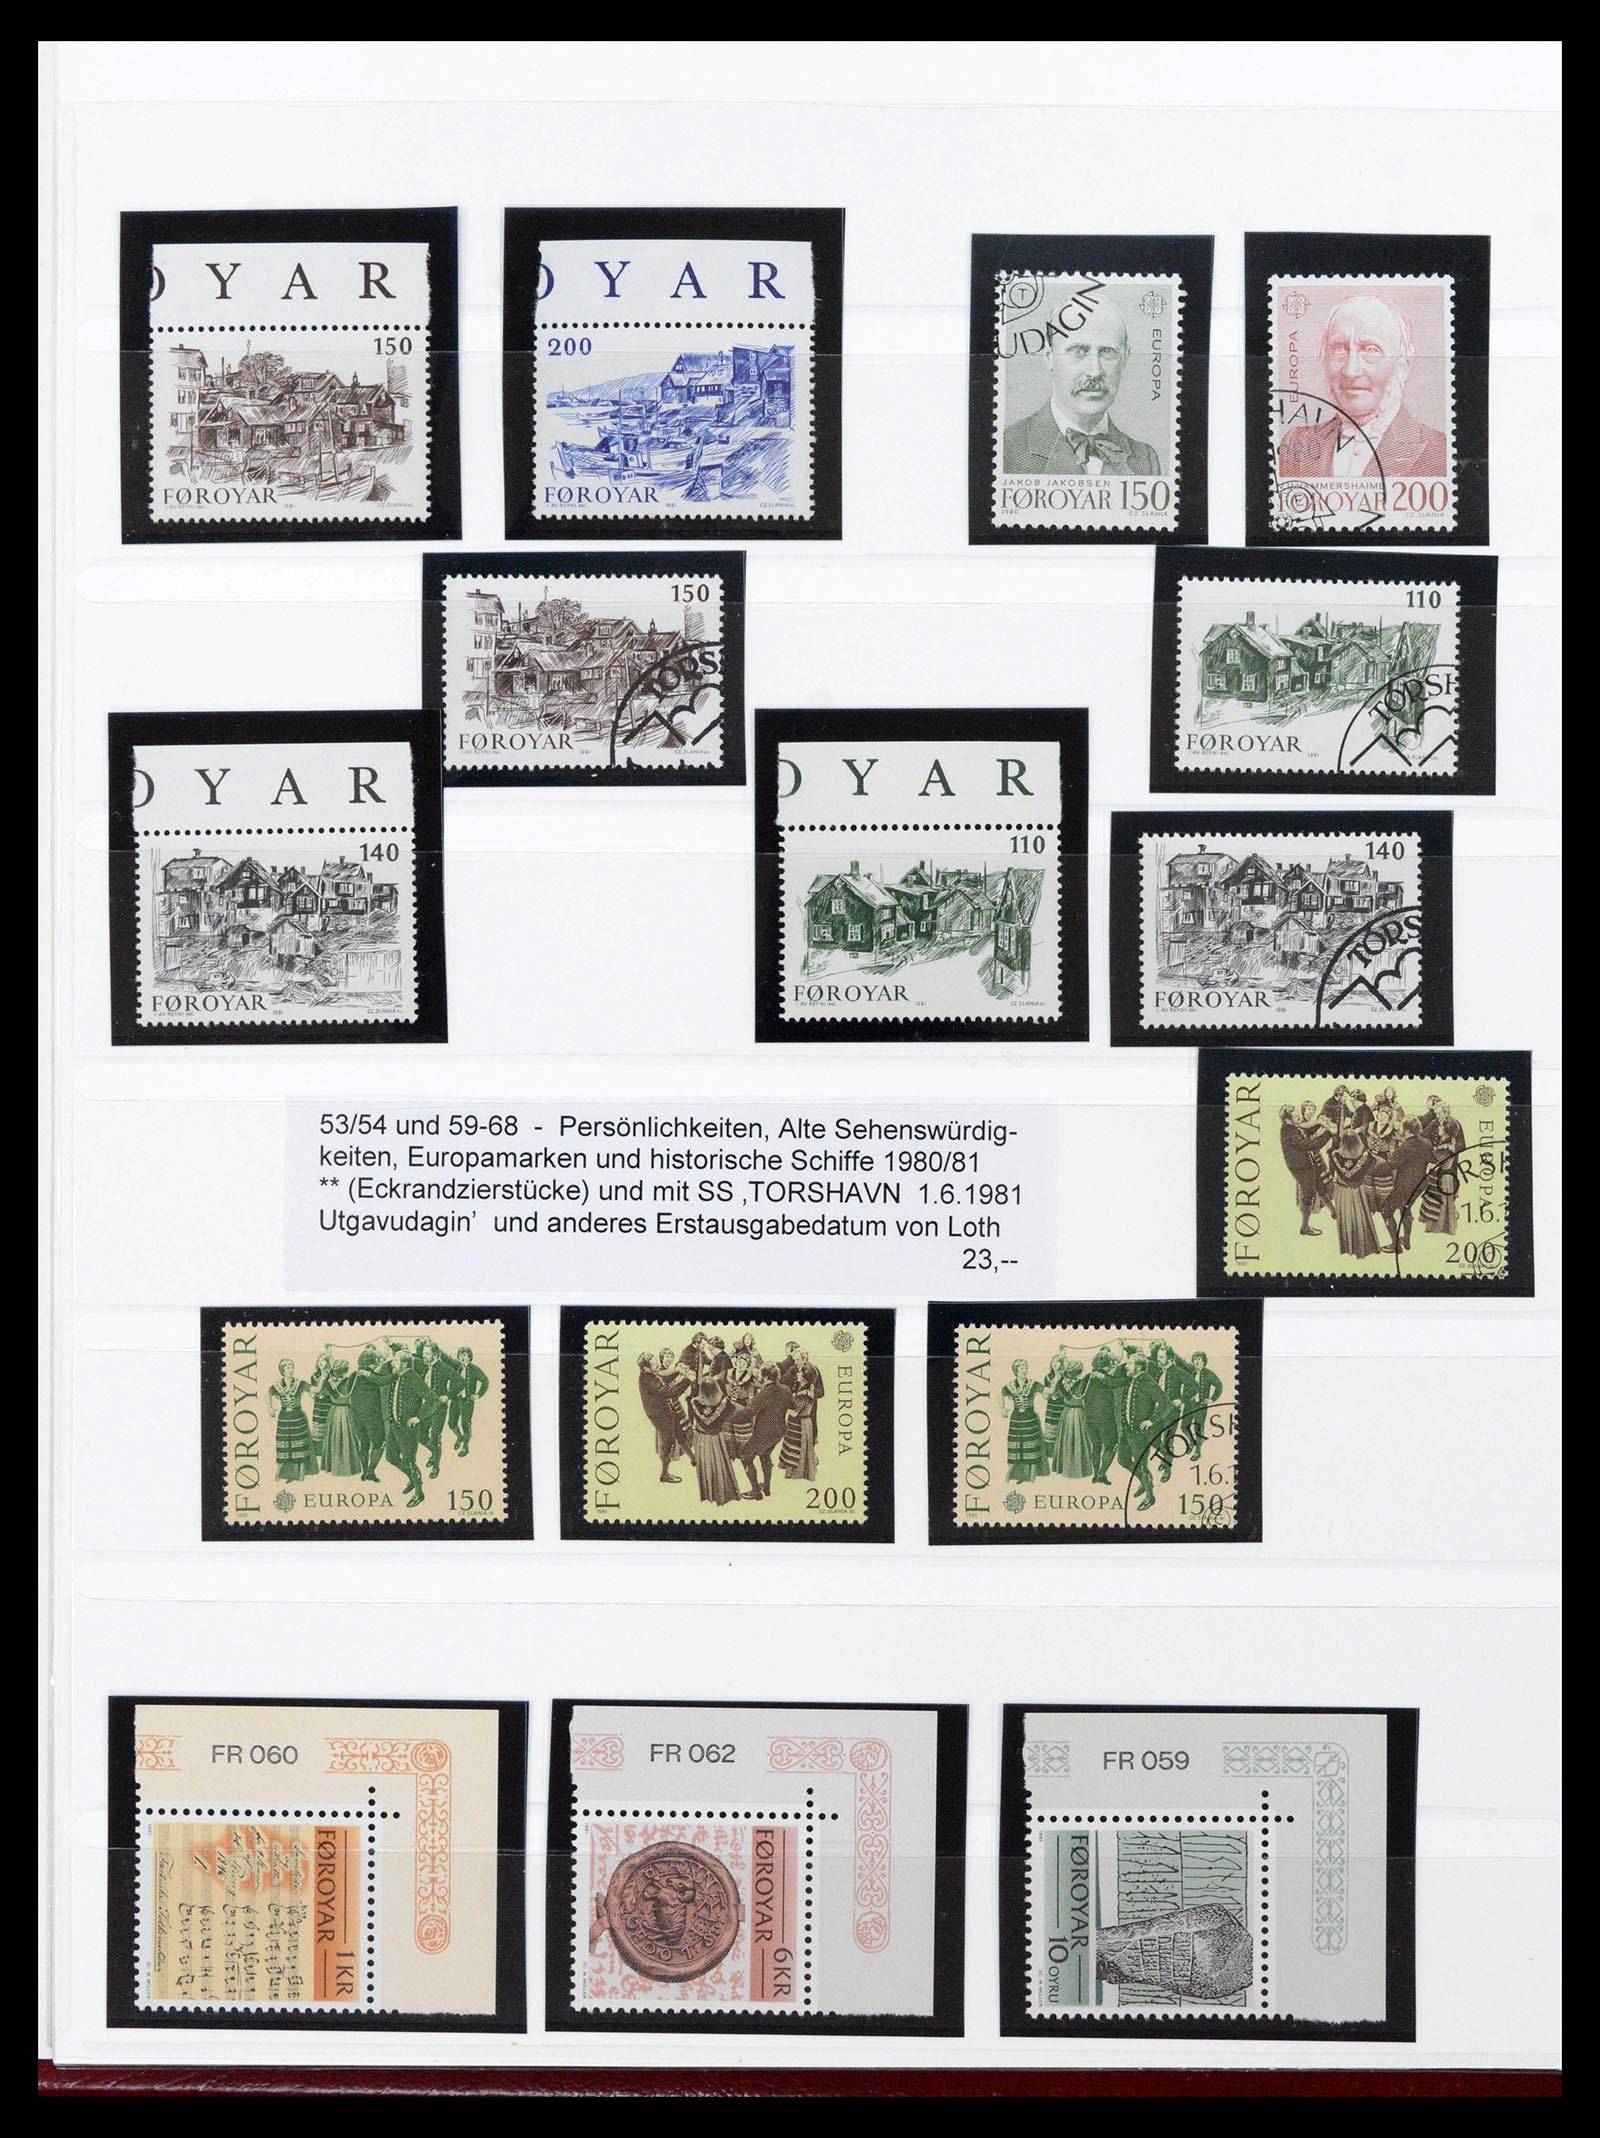 39186 0008 - Stamp collection 39186 Faroe Islands 1919-1996.